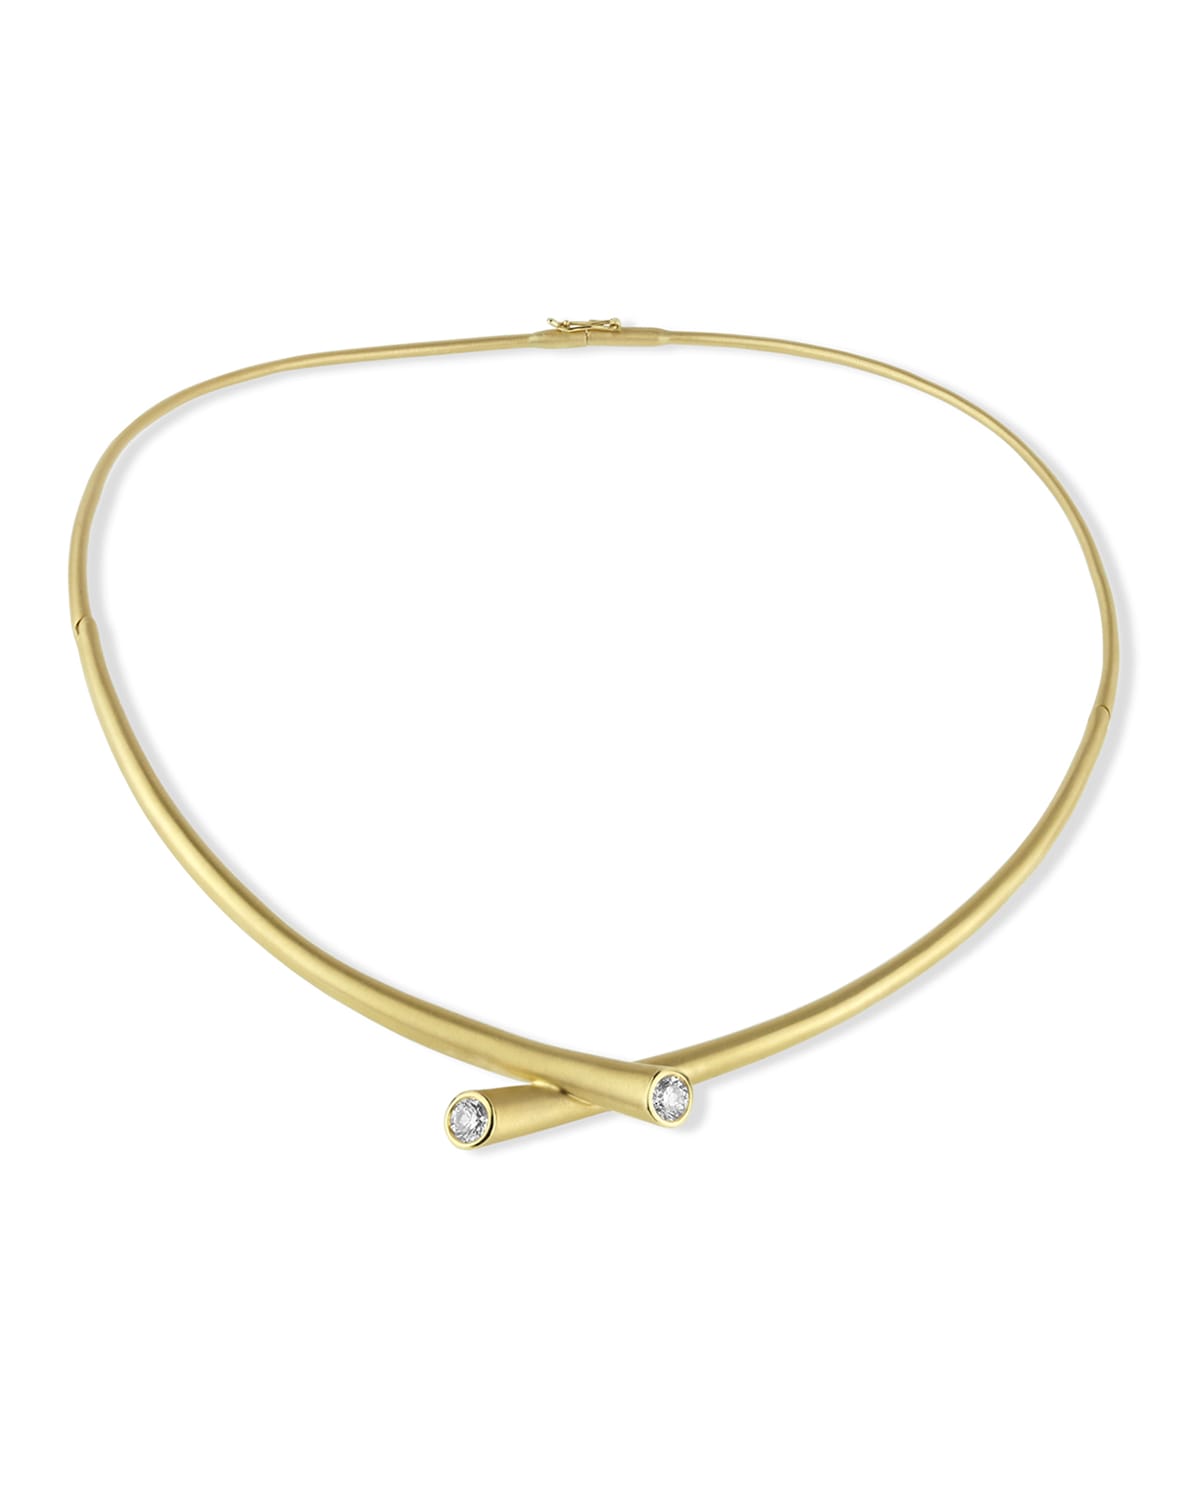 18k Gold Collar Necklace with Diamonds